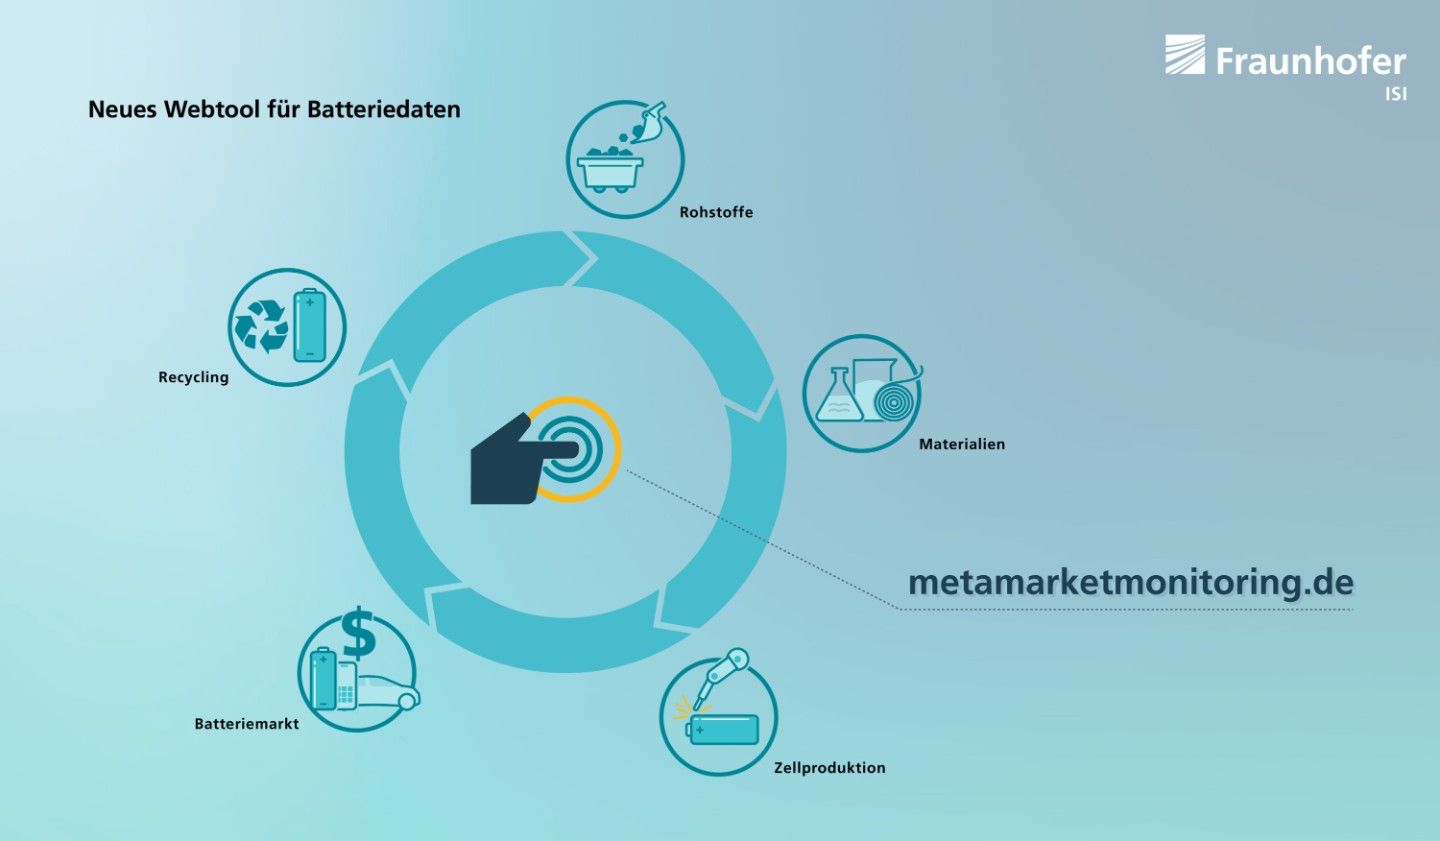 Das interaktive Meta-Markt-Monitoring-Tool vom Fraunhofer Institute for Systems and Innovation Research ISI.